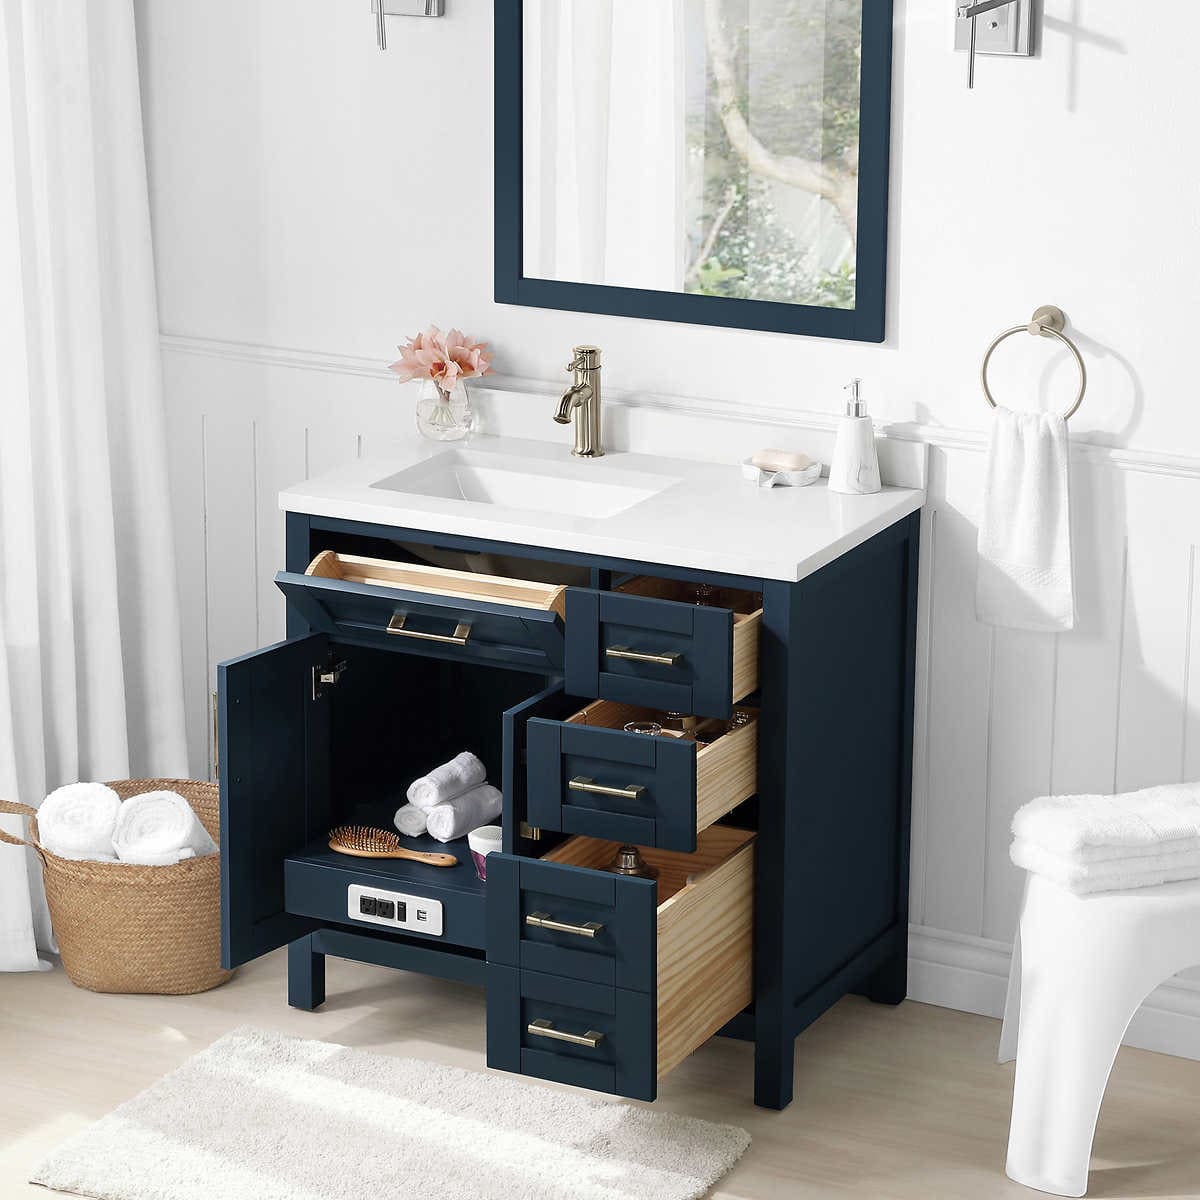 OVE Decors Lakeview Bath Vanity in Blue from Costco